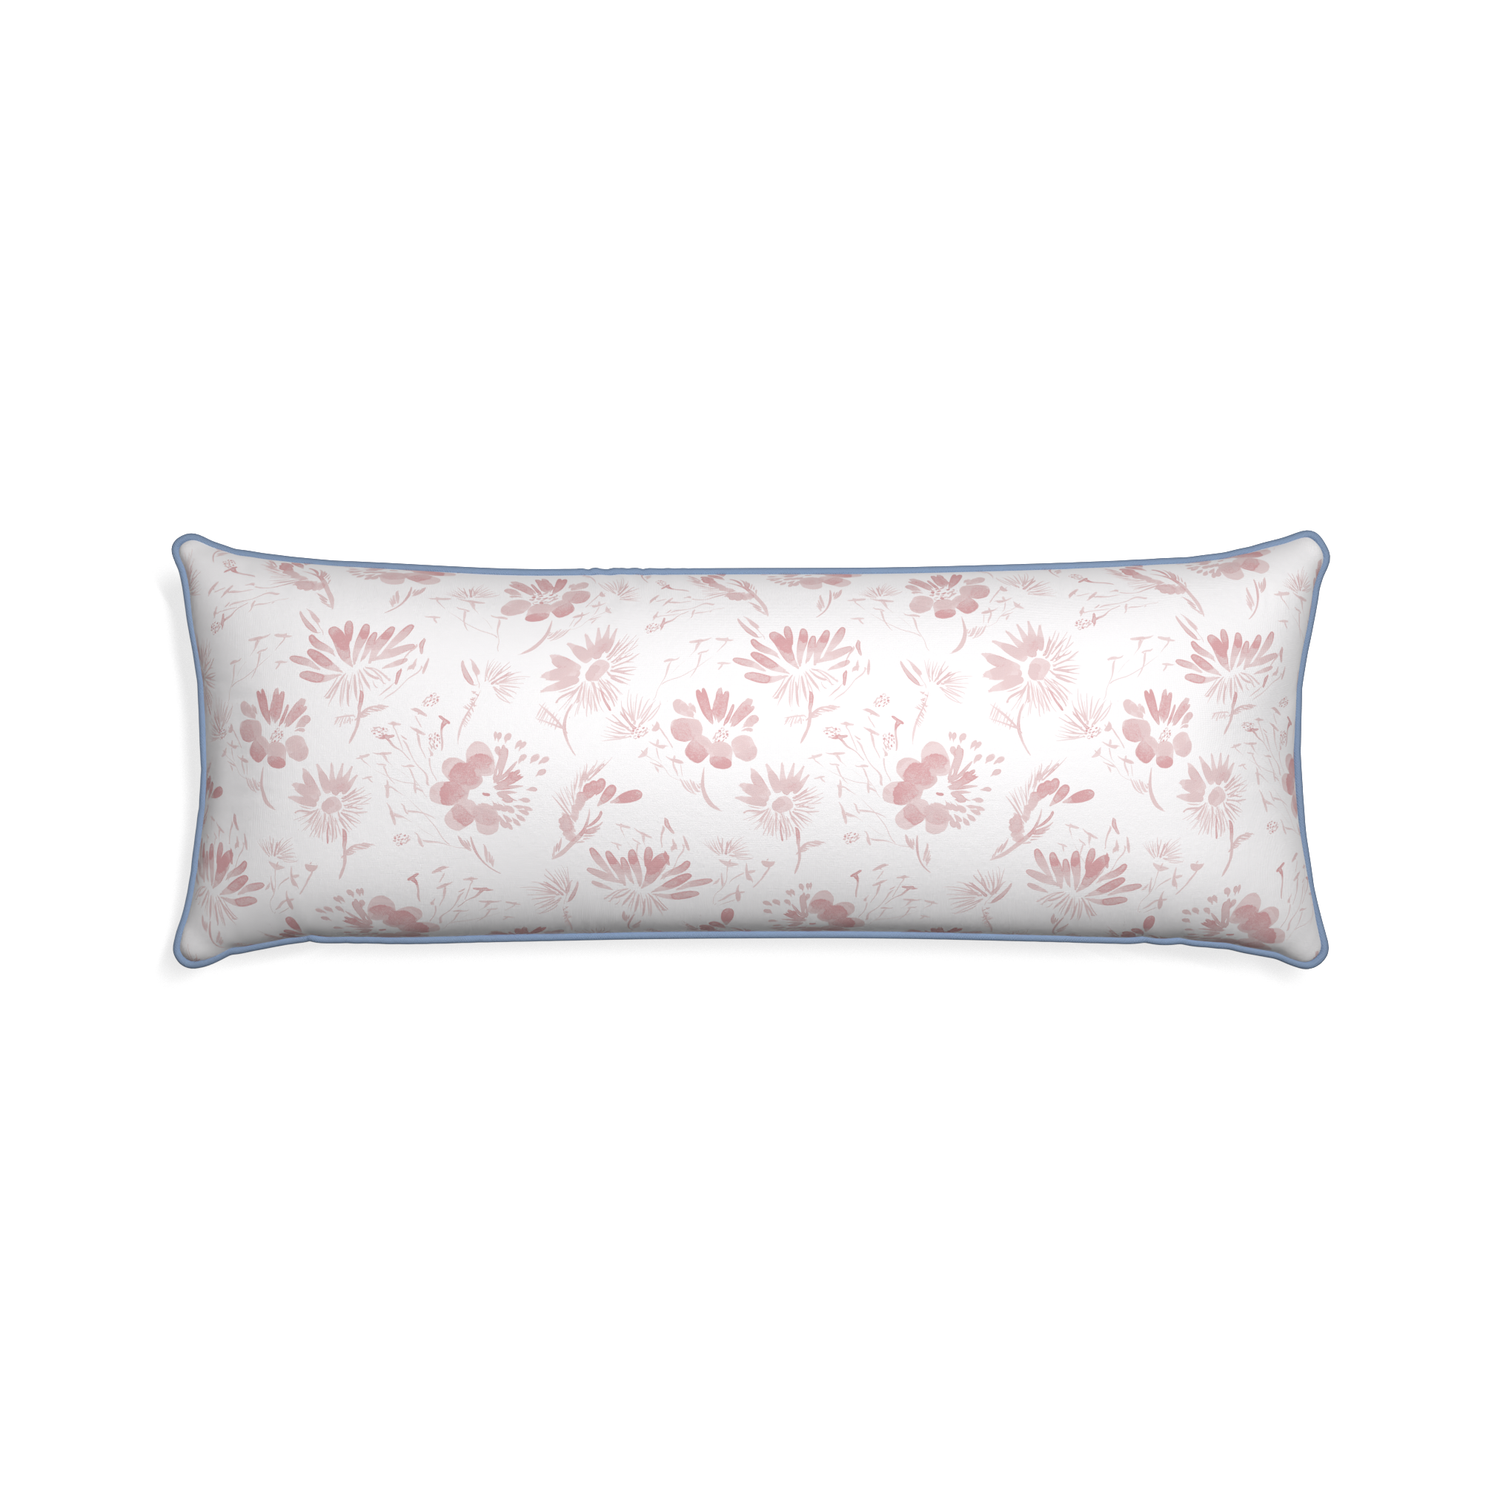 Xl-lumbar blake custom pink floralpillow with sky piping on white background